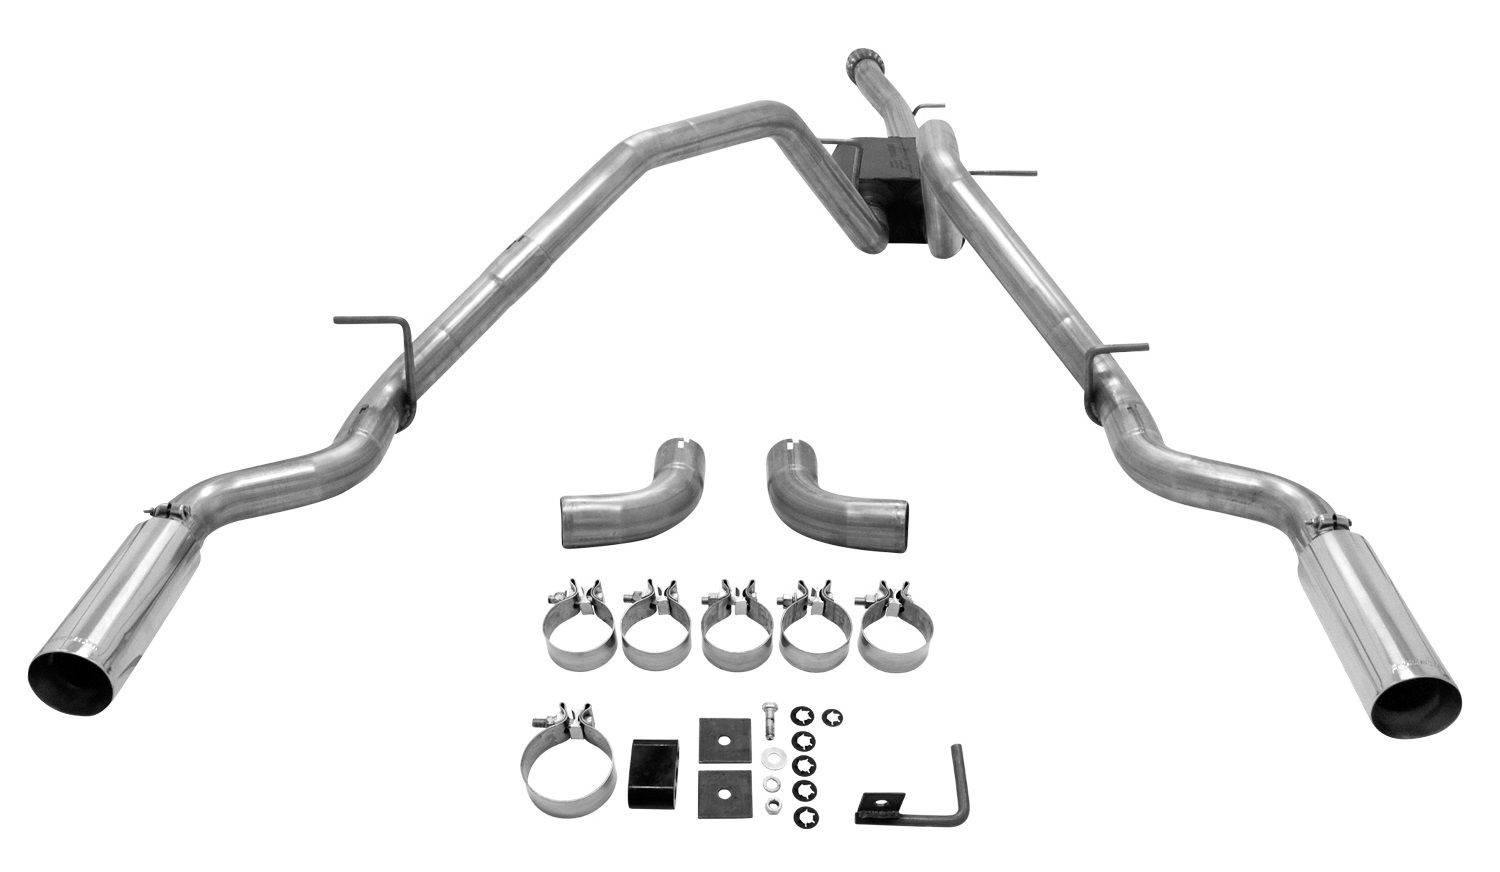 2014-2015 GMC Sierra 1500 4.3L/5.3L 4DR Crew Cab/EXT Cab Flowmaster American Thunder Cat-Back Exhaust